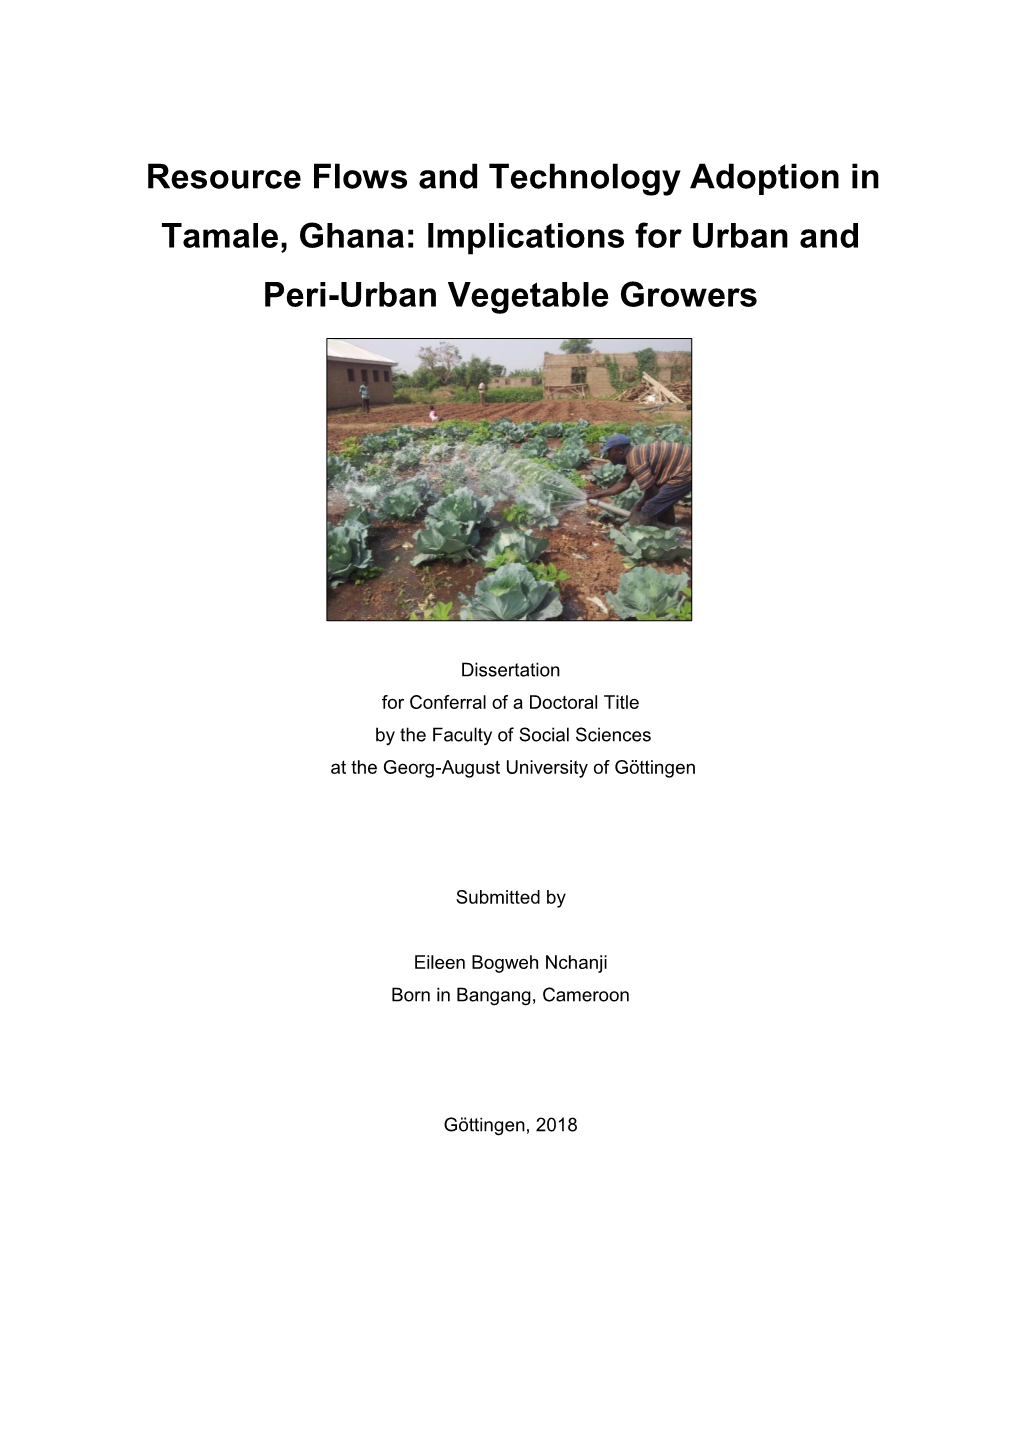 Resource Flows and Technology Adoption in Tamale, Ghana: Implications for Urban and Peri-Urban Vegetable Growers